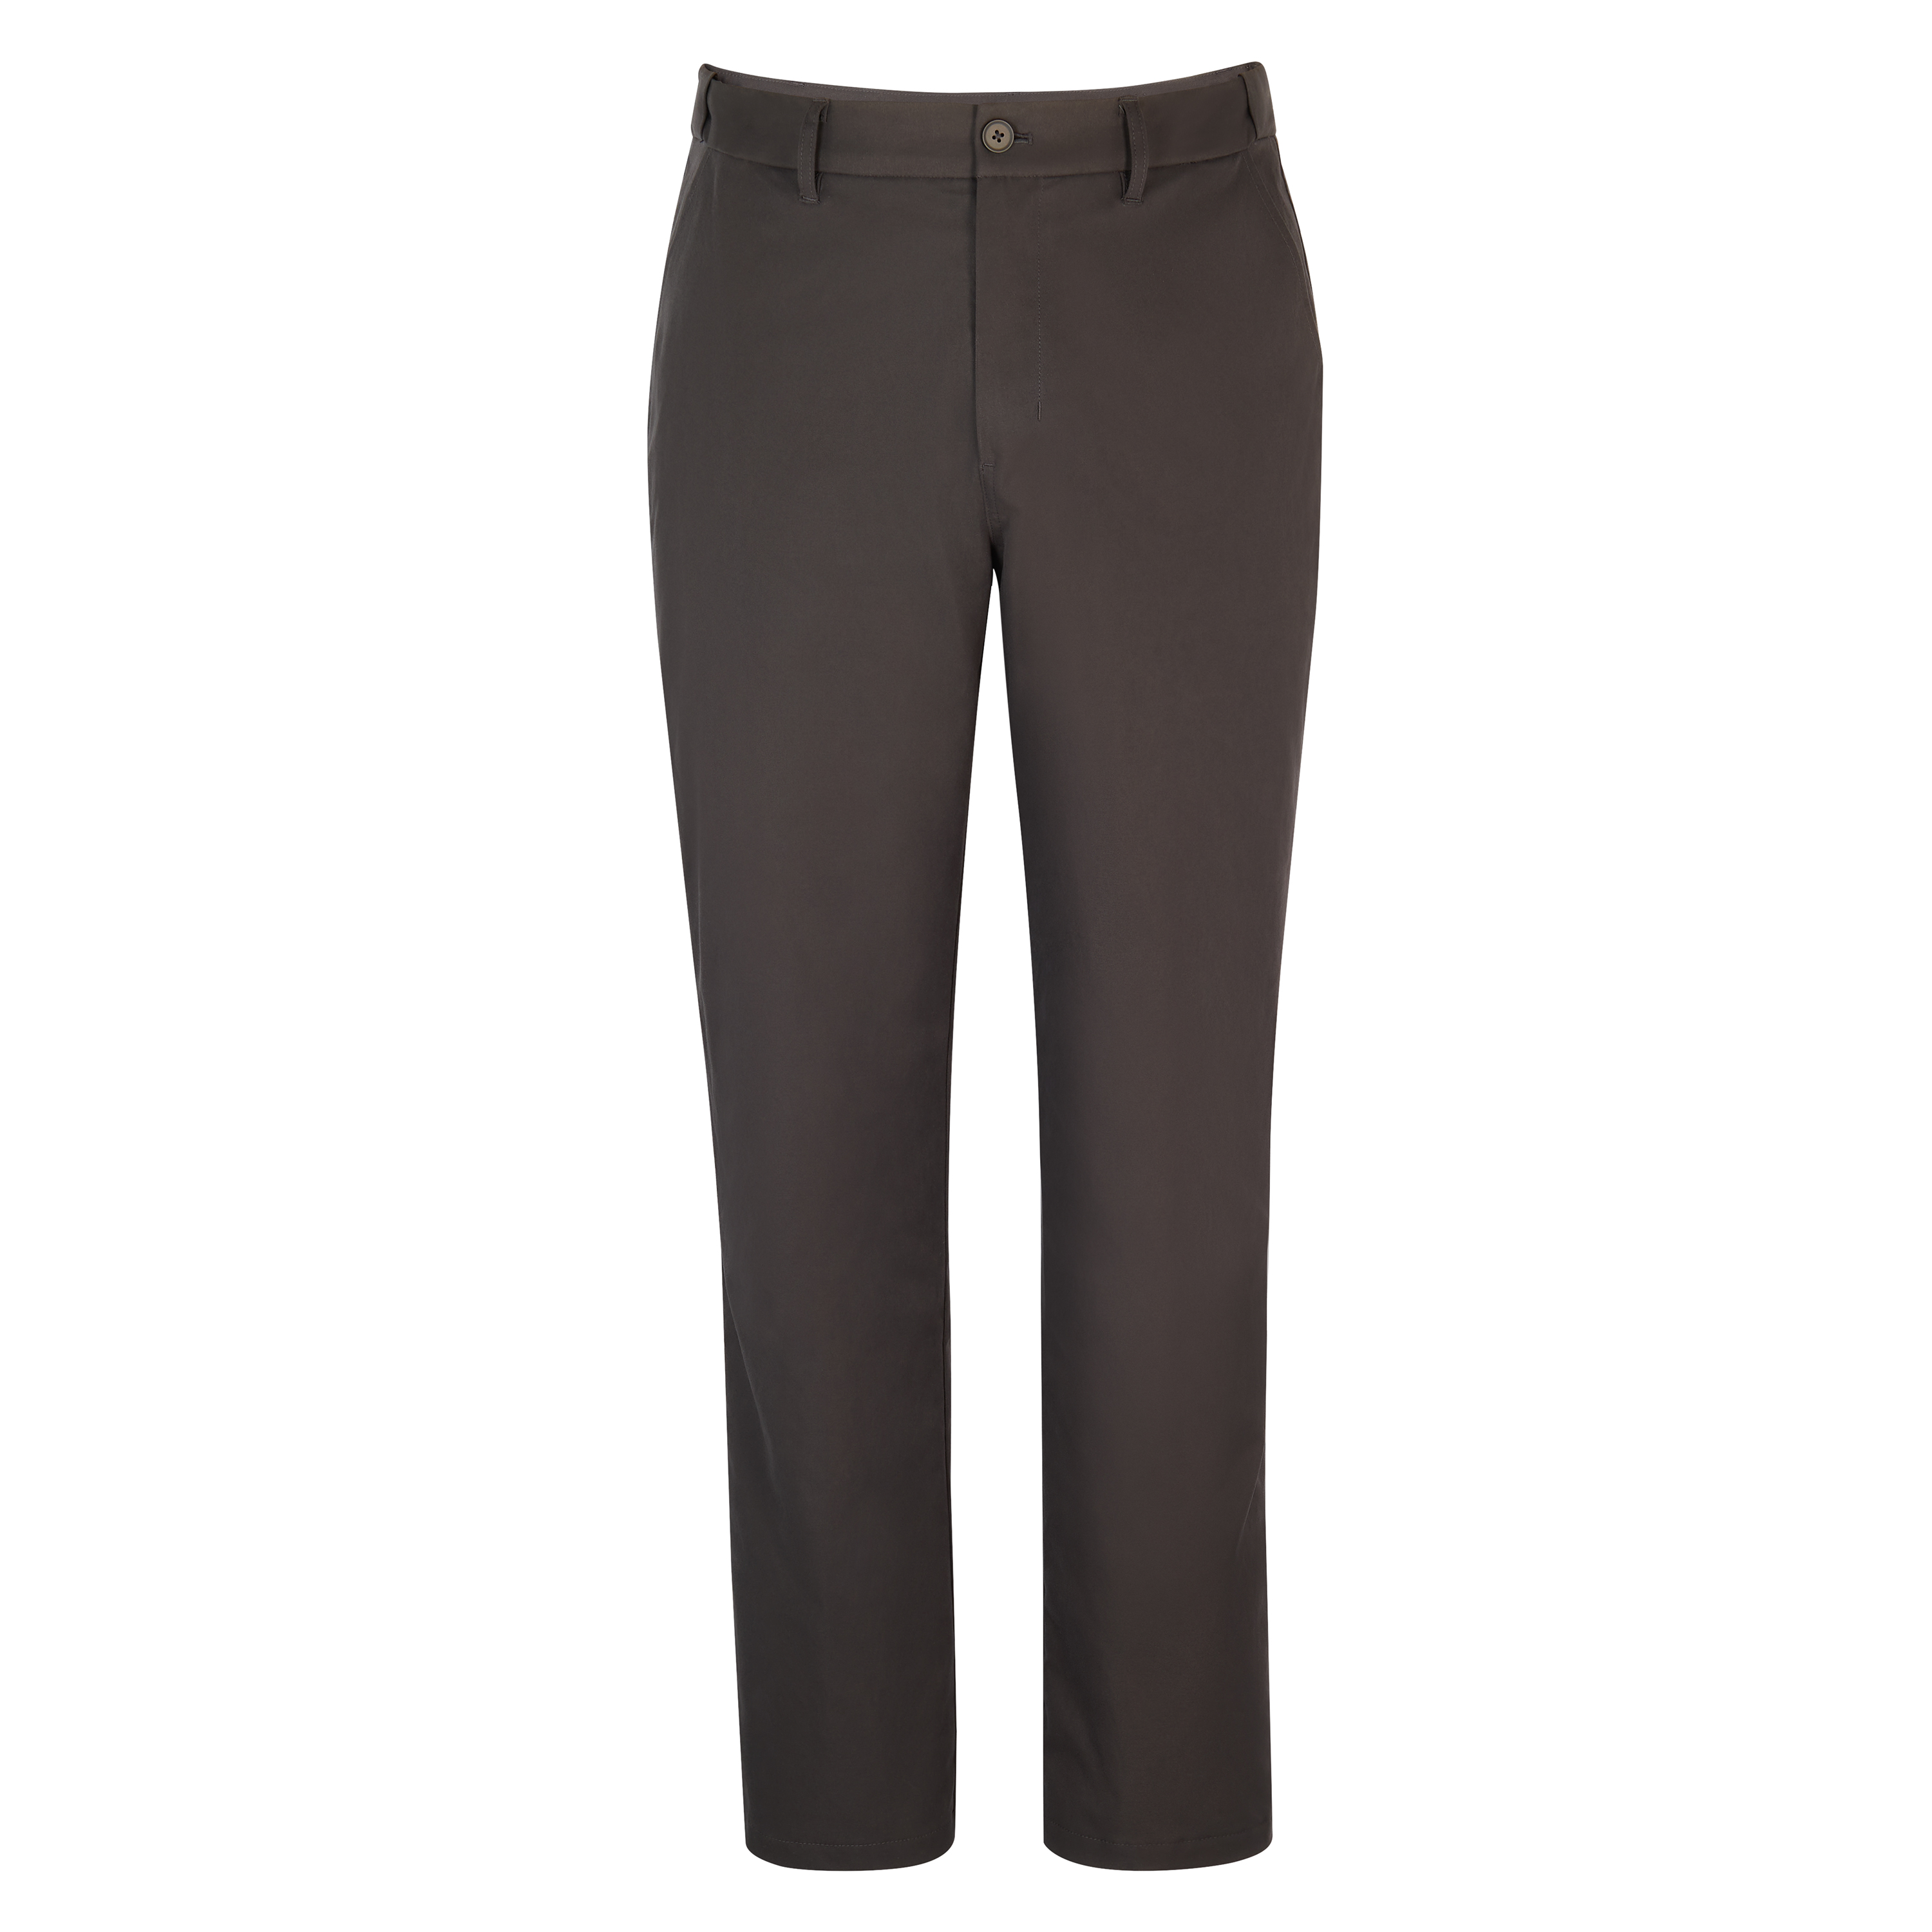 Men’s Dry District Waterproof Chinos Trousers